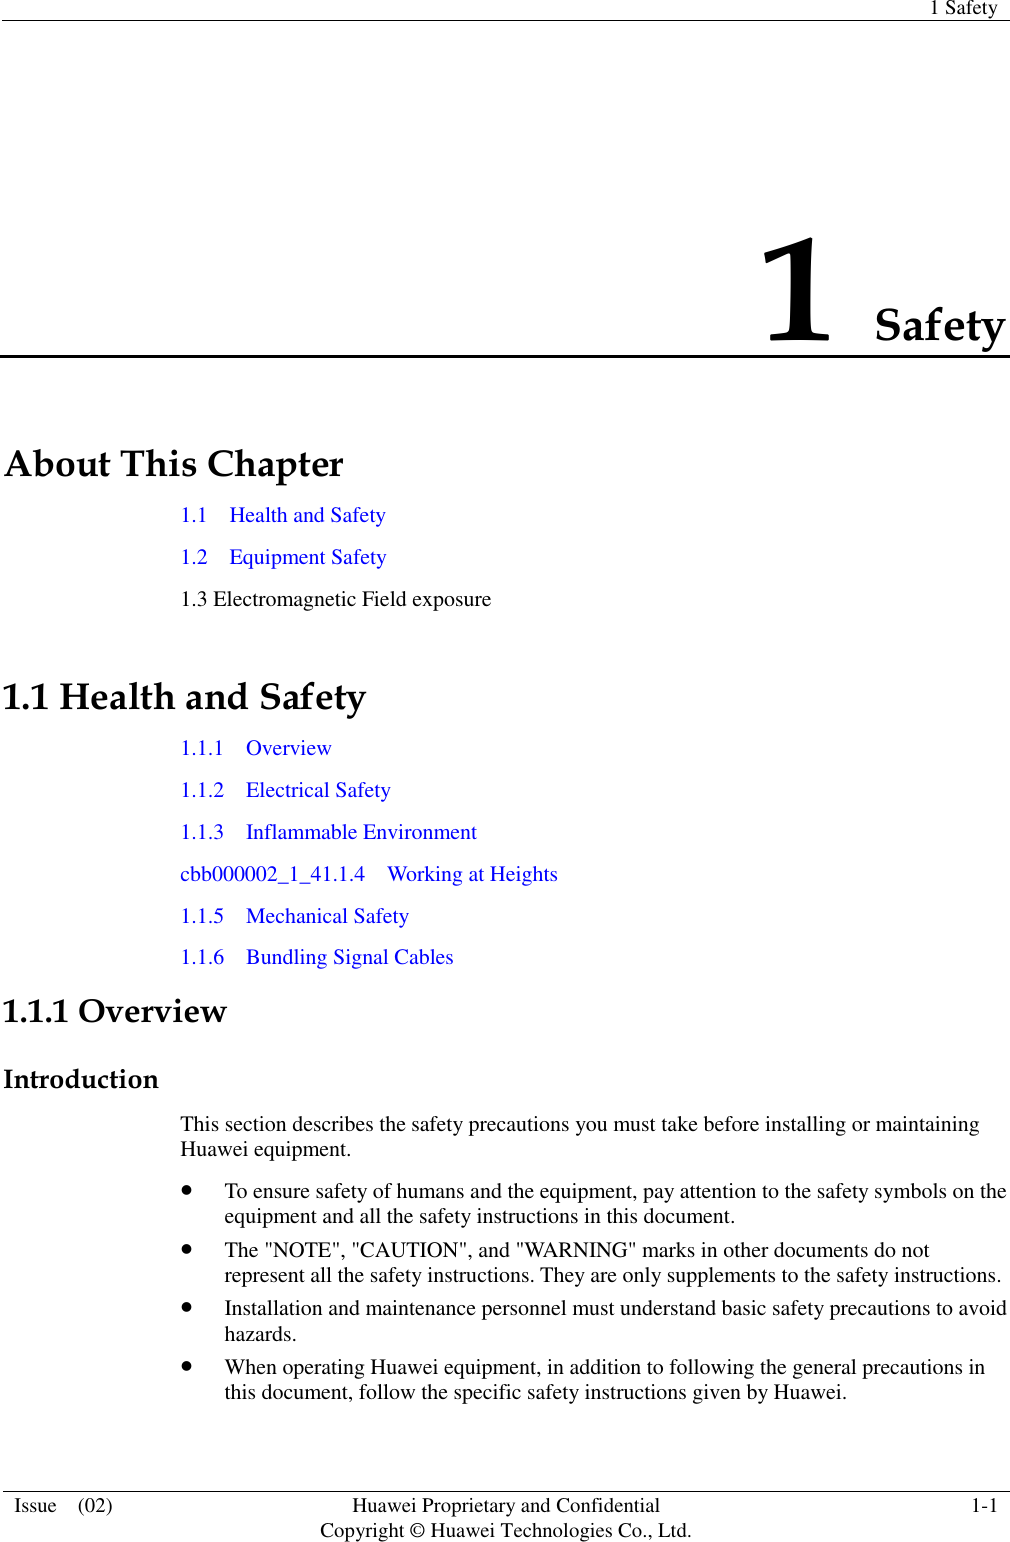   1 Safety  Issue    (02) Huawei Proprietary and Confidential                                     Copyright © Huawei Technologies Co., Ltd. 1-1  1 Safety About This Chapter 1.1    Health and Safety 1.2    Equipment Safety 1.3 Electromagnetic Field exposure 1.1 Health and Safety 1.1.1    Overview 1.1.2    Electrical Safety 1.1.3    Inflammable Environment cbb000002_1_41.1.4  Working at Heights 1.1.5  Mechanical Safety 1.1.6  Bundling Signal Cables 1.1.1 Overview Introduction This section describes the safety precautions you must take before installing or maintaining Huawei equipment.  To ensure safety of humans and the equipment, pay attention to the safety symbols on the equipment and all the safety instructions in this document.  The &quot;NOTE&quot;, &quot;CAUTION&quot;, and &quot;WARNING&quot; marks in other documents do not represent all the safety instructions. They are only supplements to the safety instructions.  Installation and maintenance personnel must understand basic safety precautions to avoid hazards.  When operating Huawei equipment, in addition to following the general precautions in this document, follow the specific safety instructions given by Huawei. 